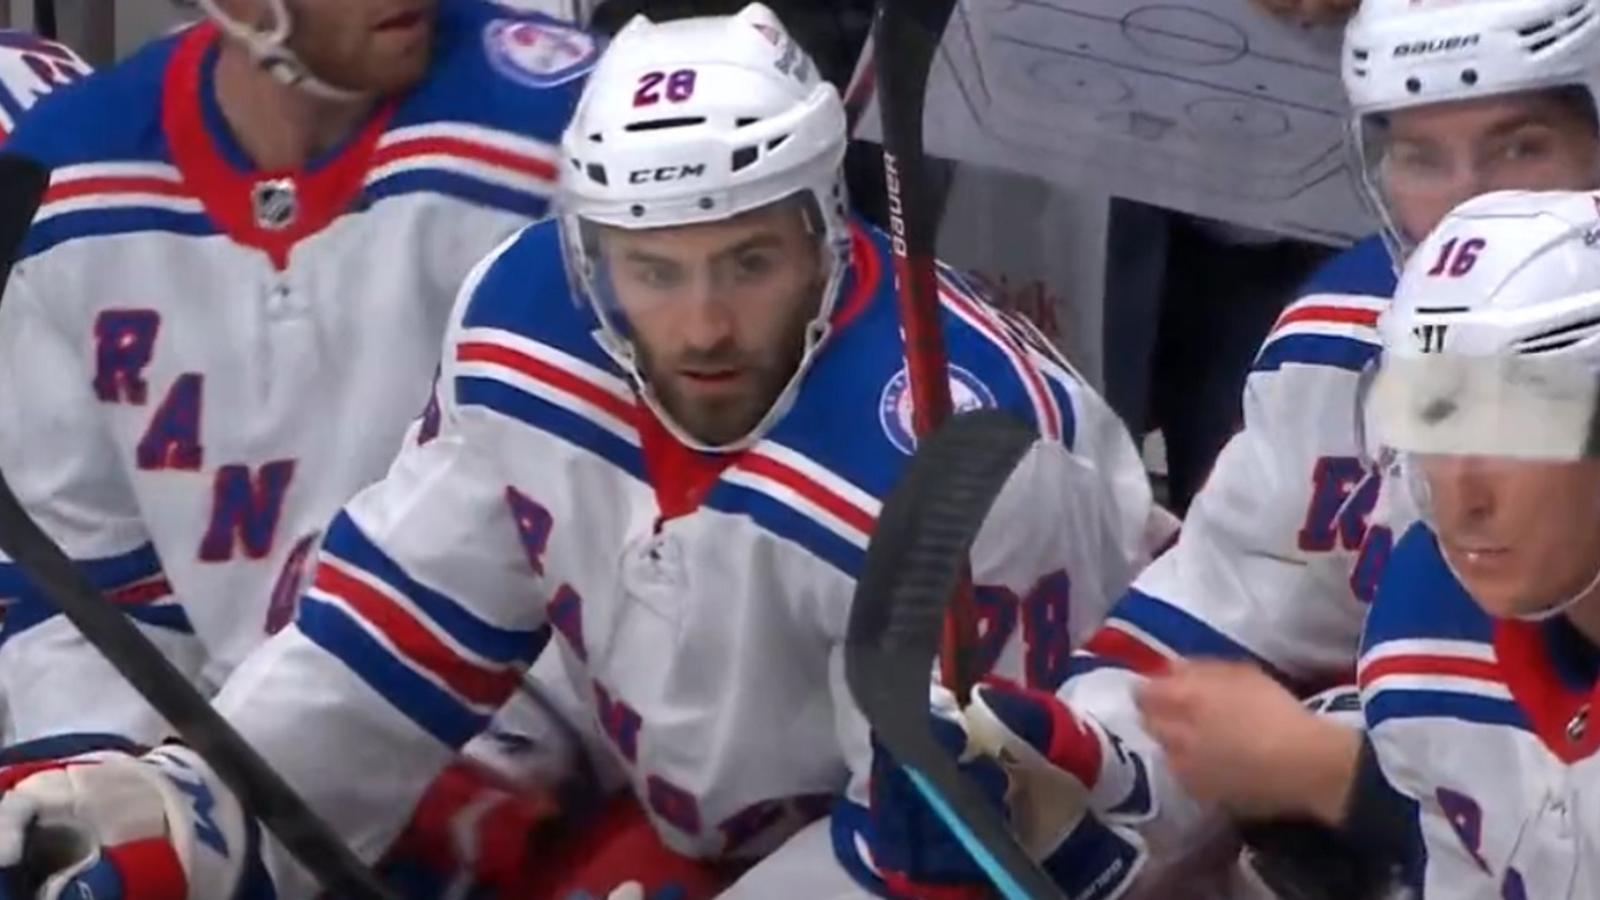 Son of 9/11 first responder plays his first NHL game for the New York Rangers.